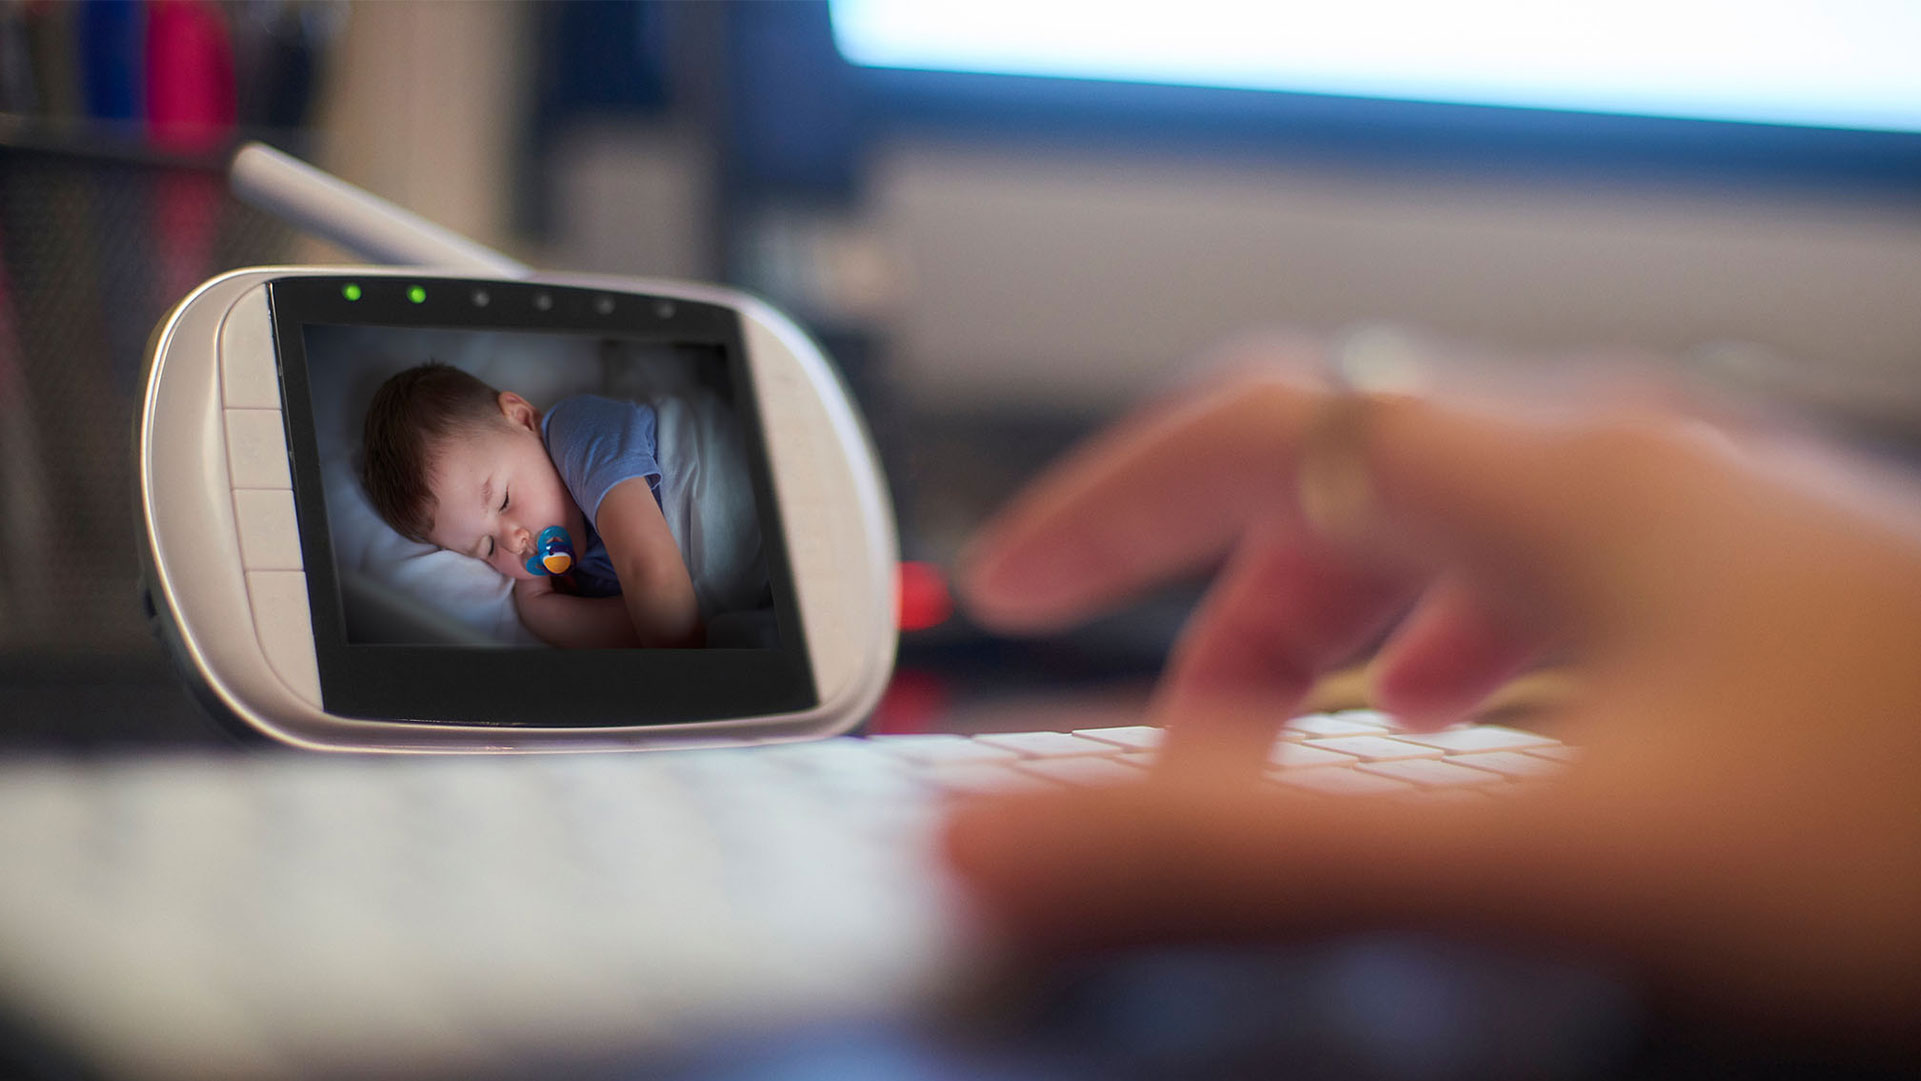 Baby Monitor Security: Ward Off Hackers with These Tips - Panda Security  Mediacenter